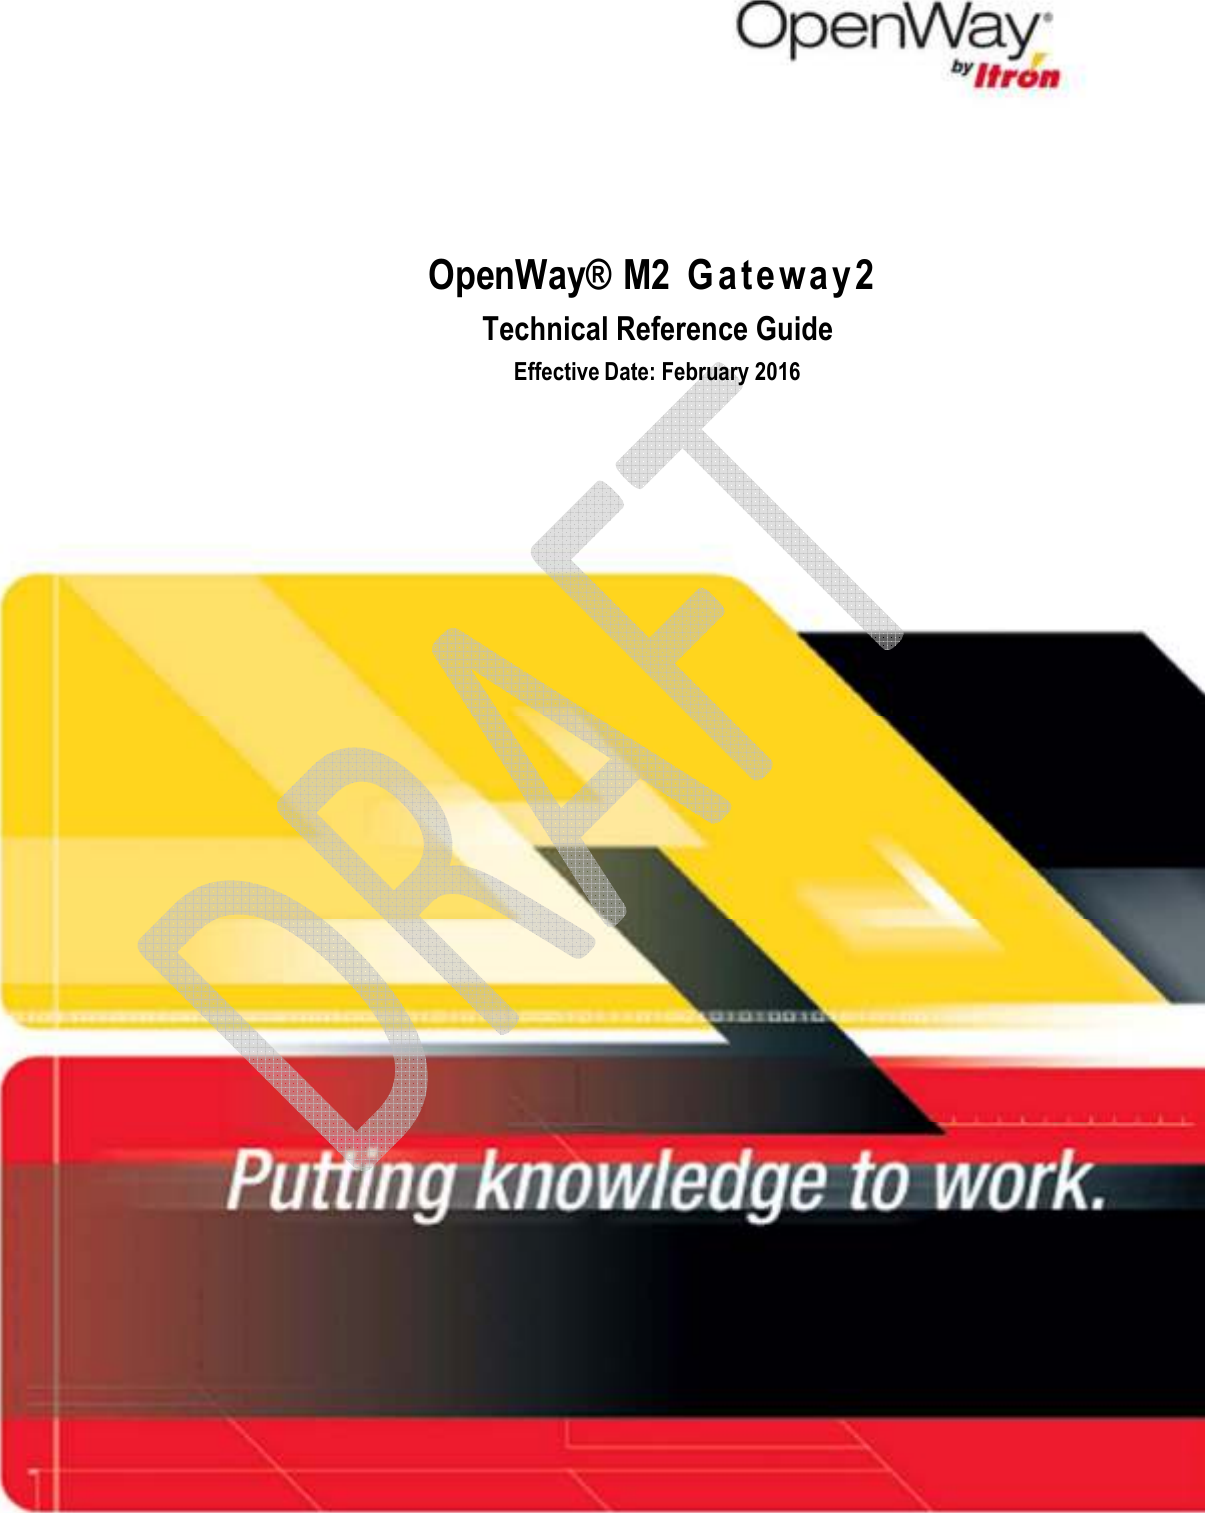  0 OpenWay® M2 Gateway Technical Reference Guide            OpenWay® M2 Gateway2  Technical Reference Guide  Effective Date: February 2016     